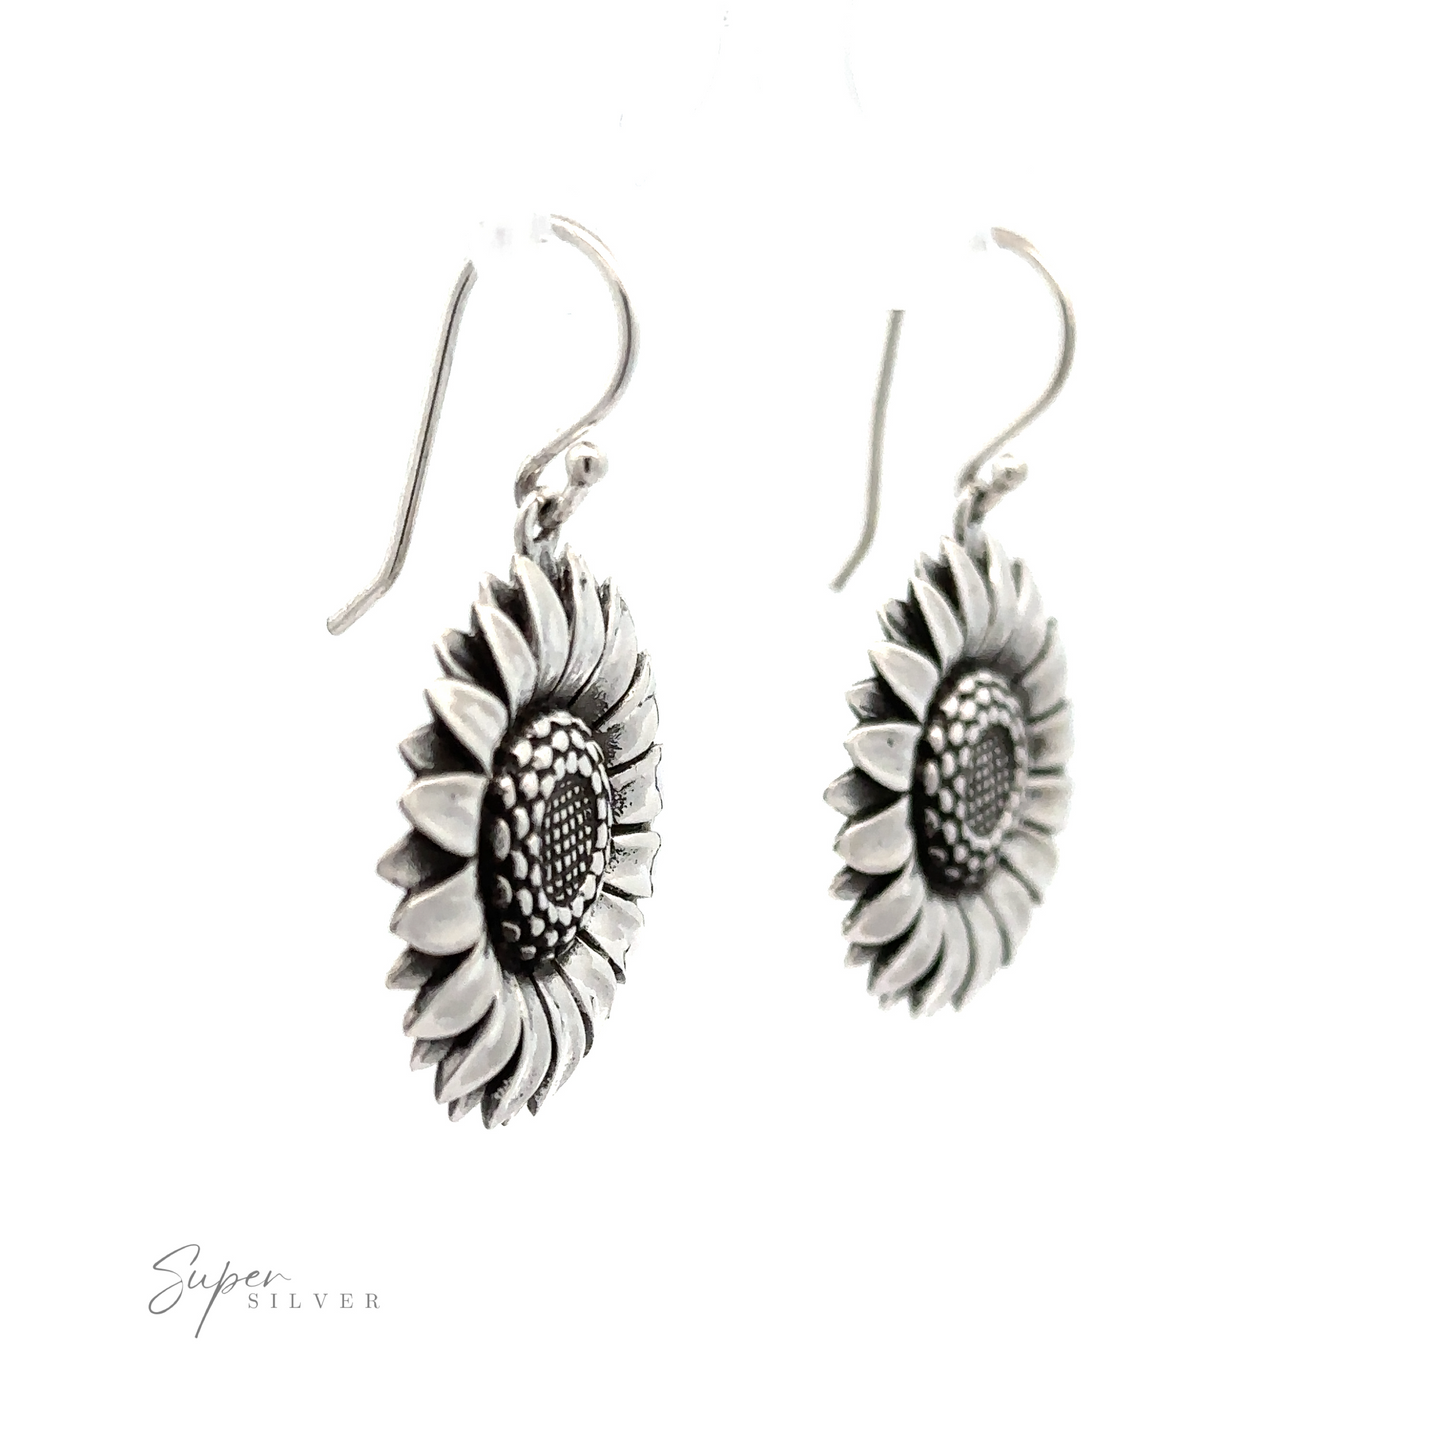 
                  
                    A pair of Silver Sunflower Earrings with detailed petals and textured centers, hanging from curved hooks, against a white background.
                  
                